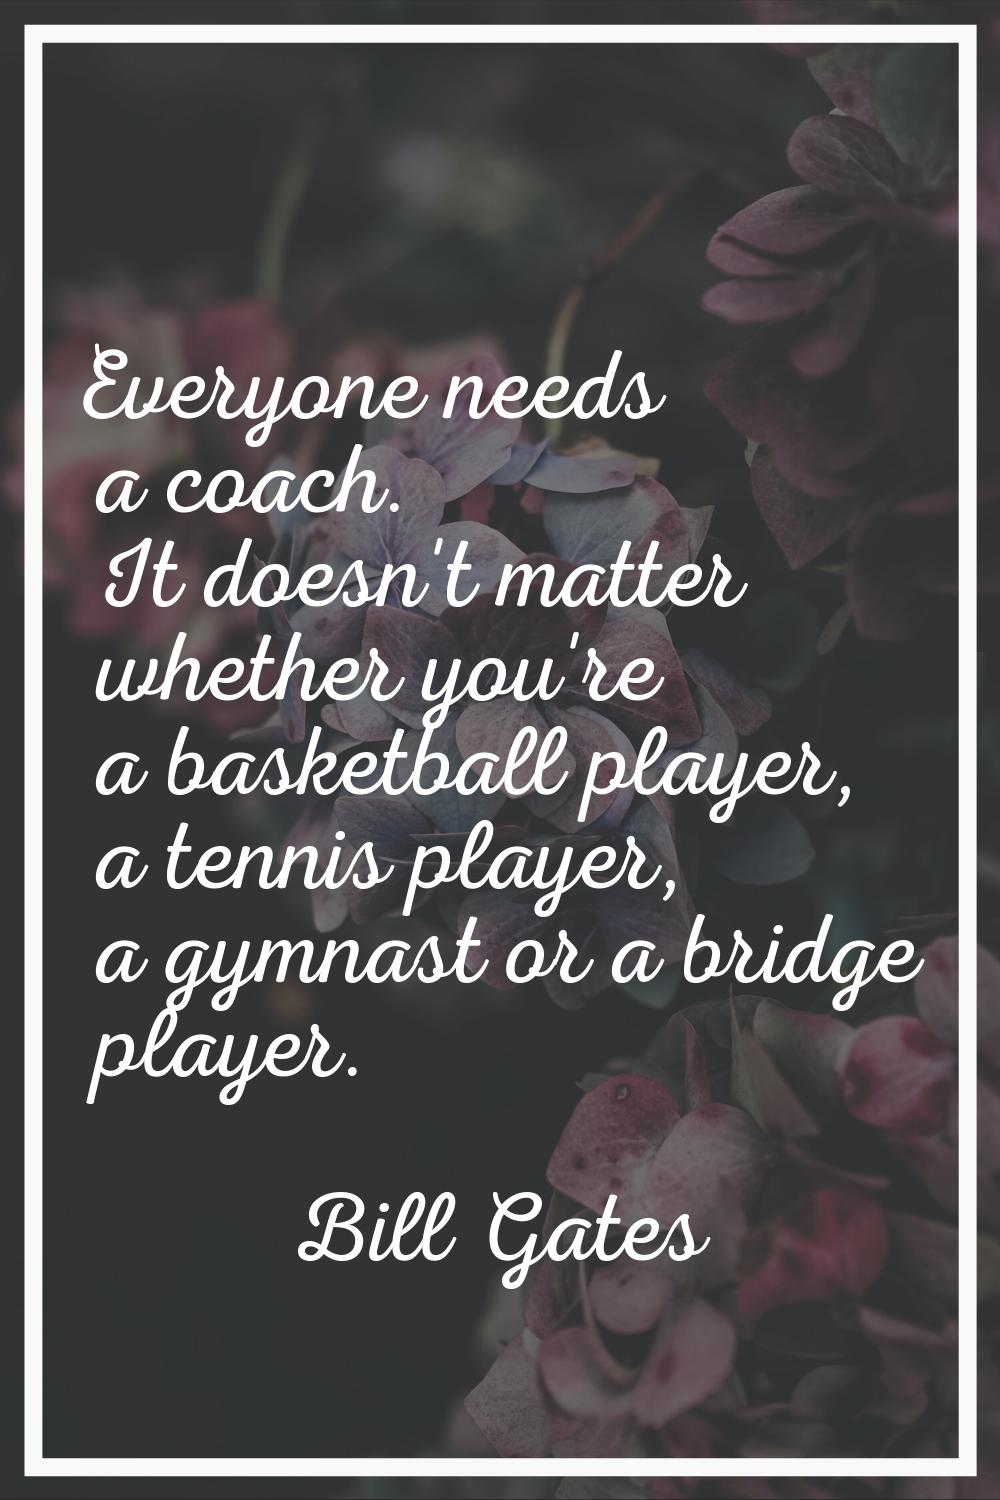 Everyone needs a coach. It doesn't matter whether you're a basketball player, a tennis player, a gy